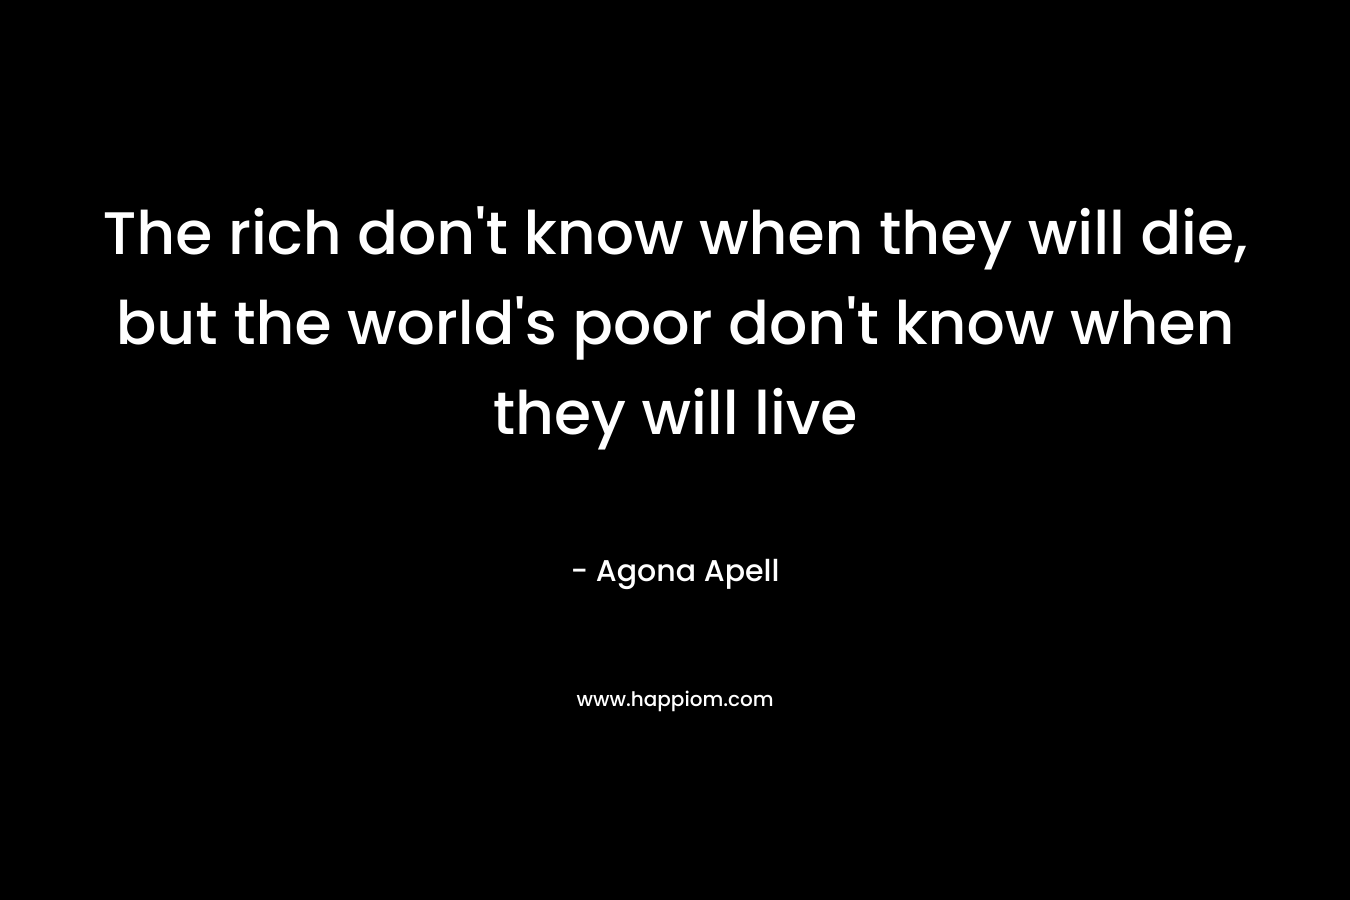 The rich don't know when they will die, but the world's poor don't know when they will live